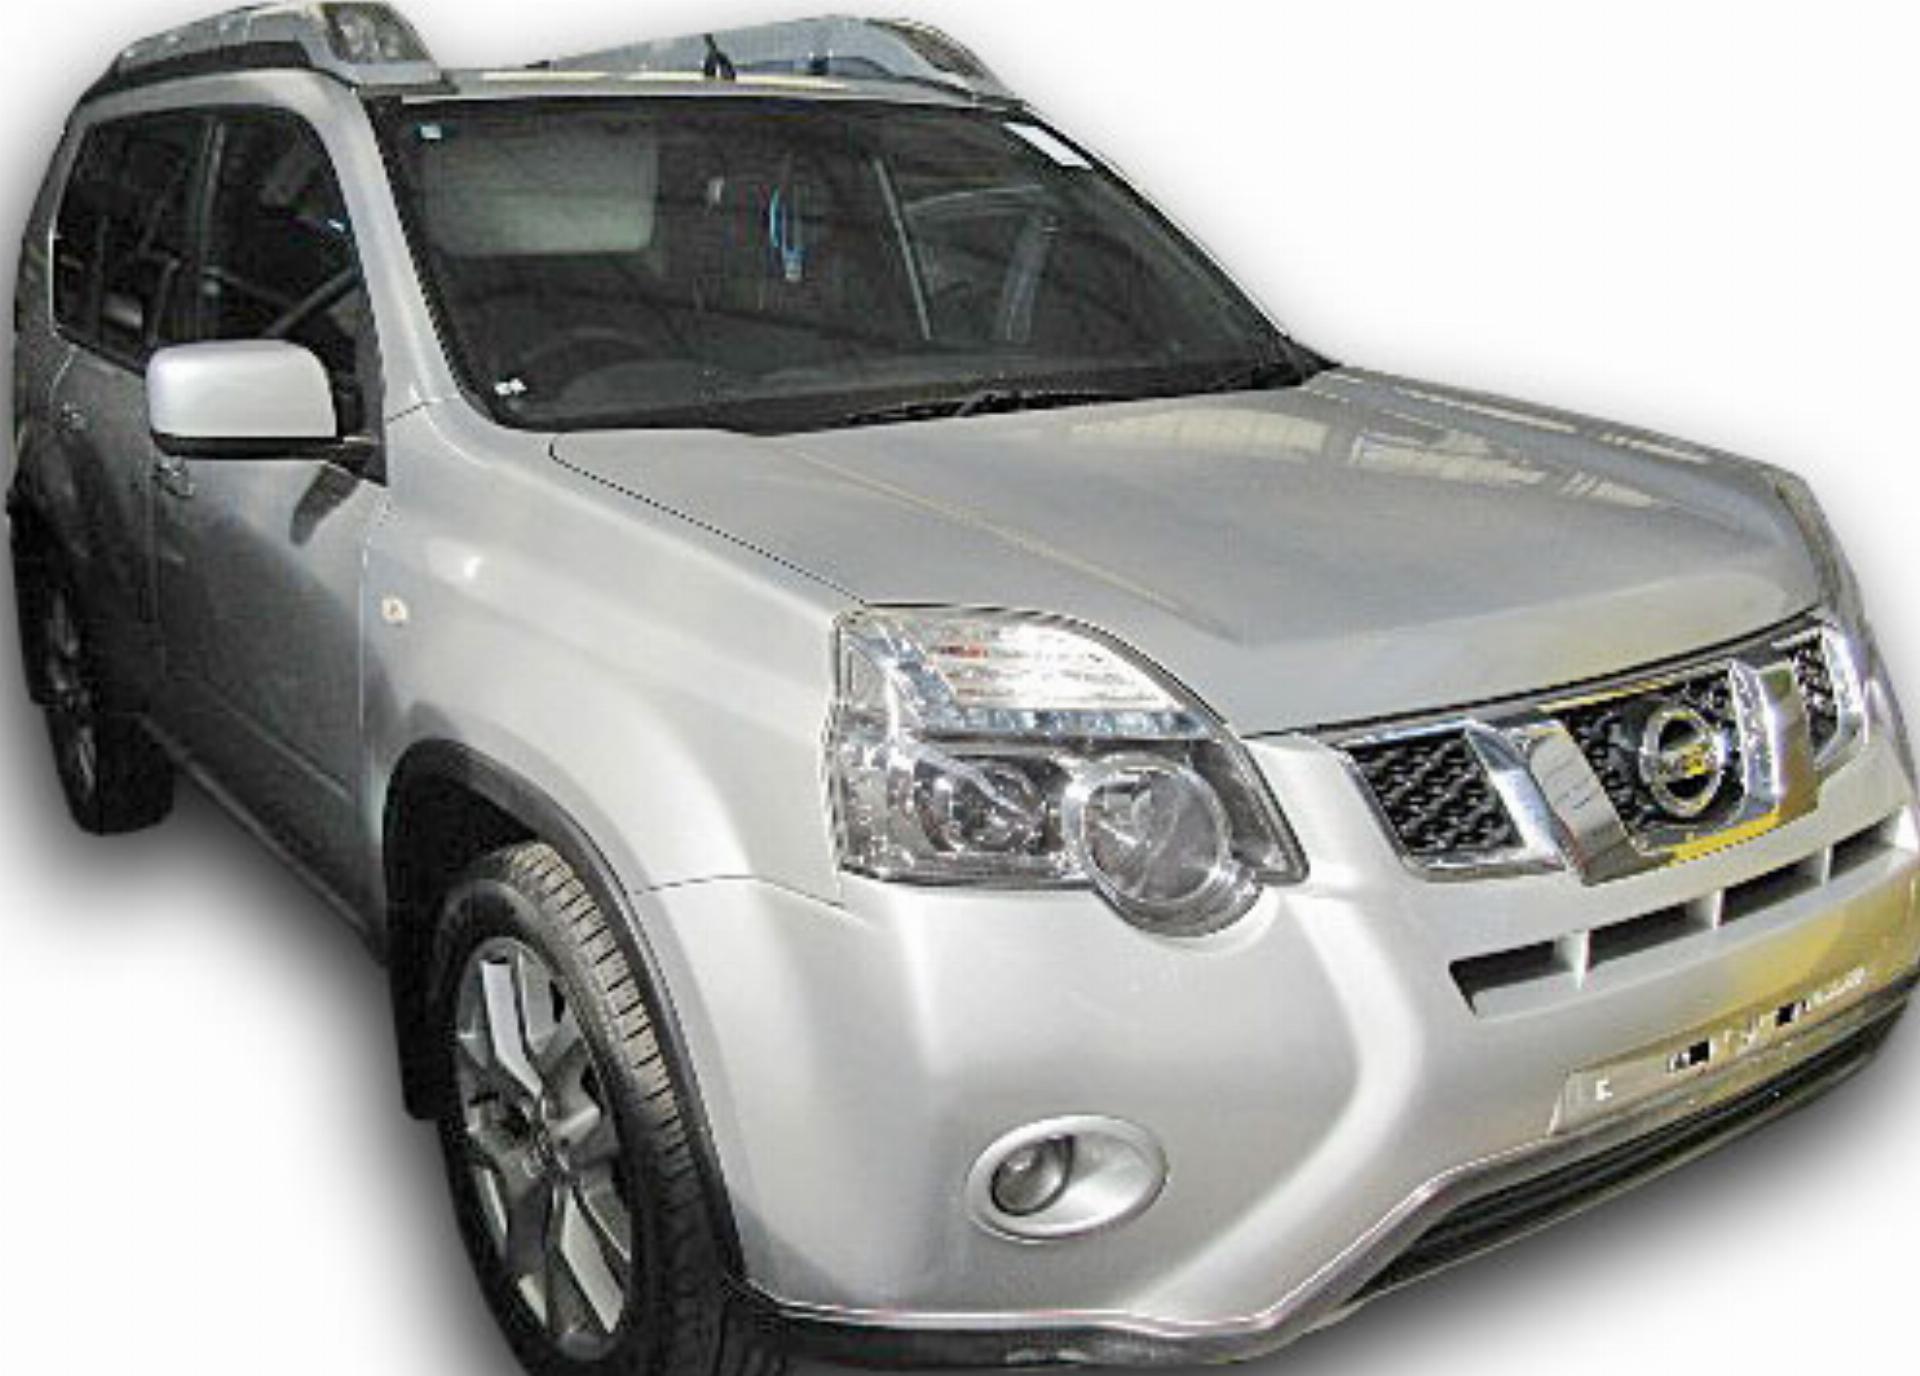 Repossessed Nissan XTRAIL 2.0 Dci LE A/T 2011 on auction